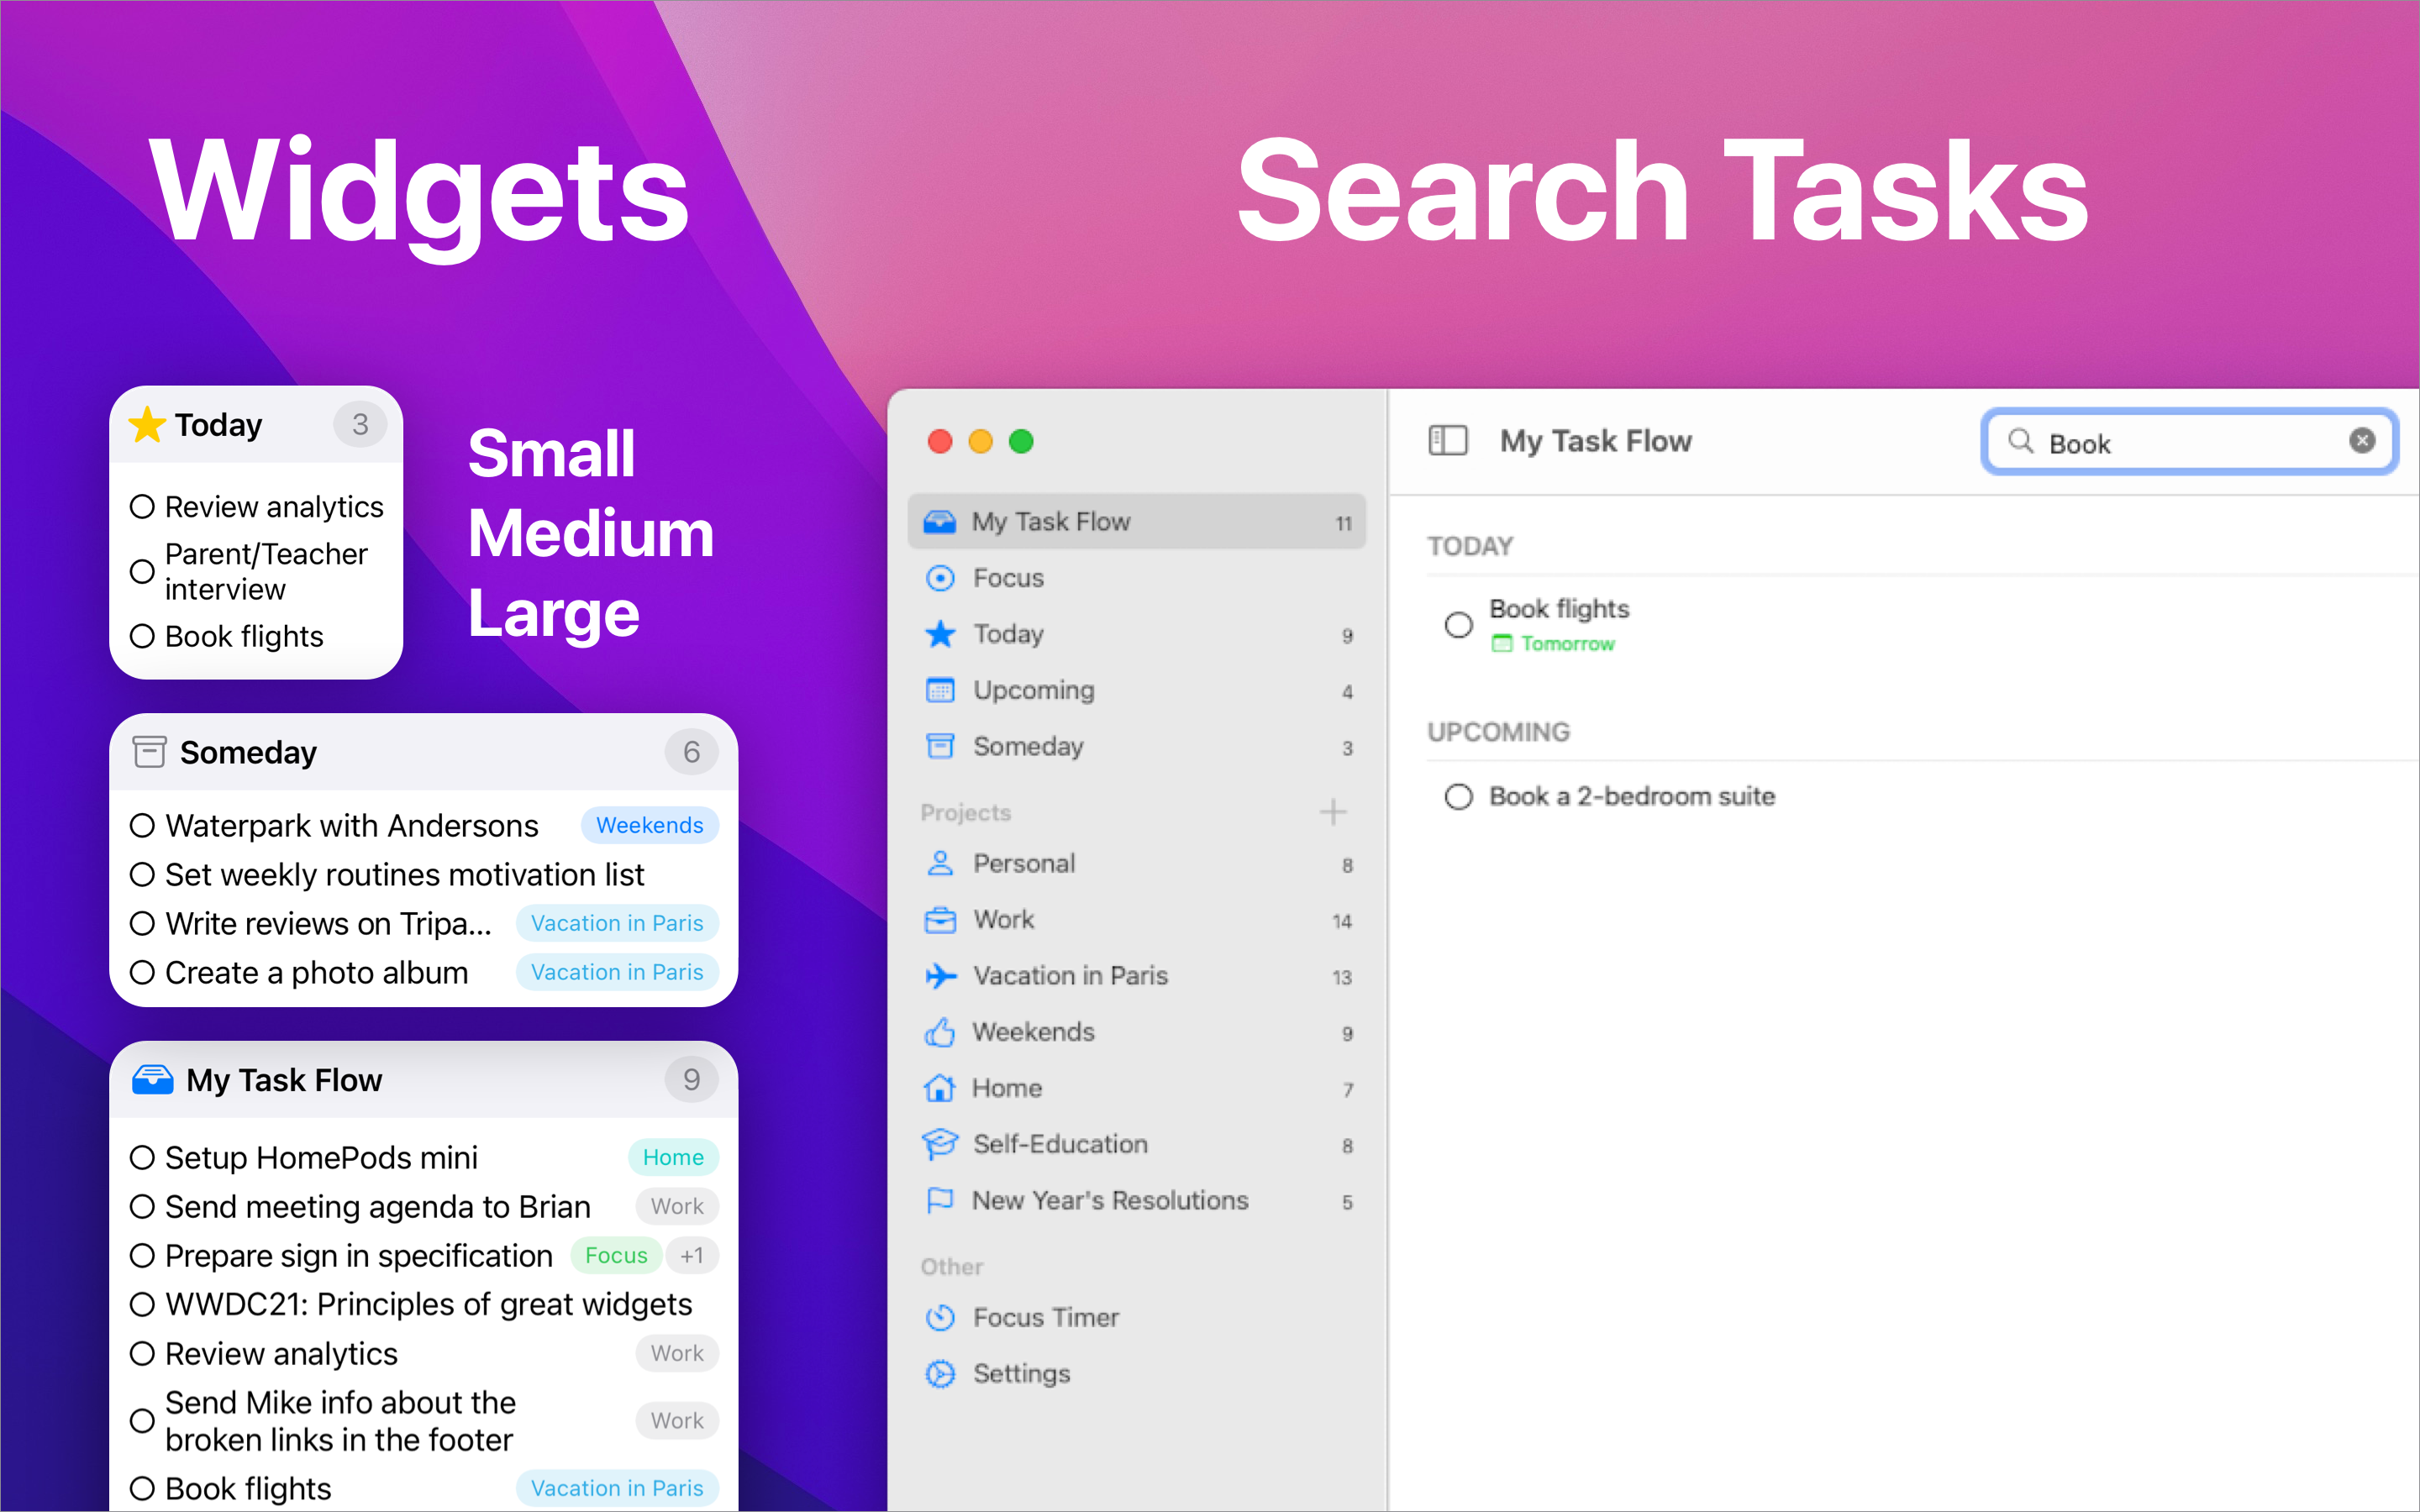 Widgets and Search